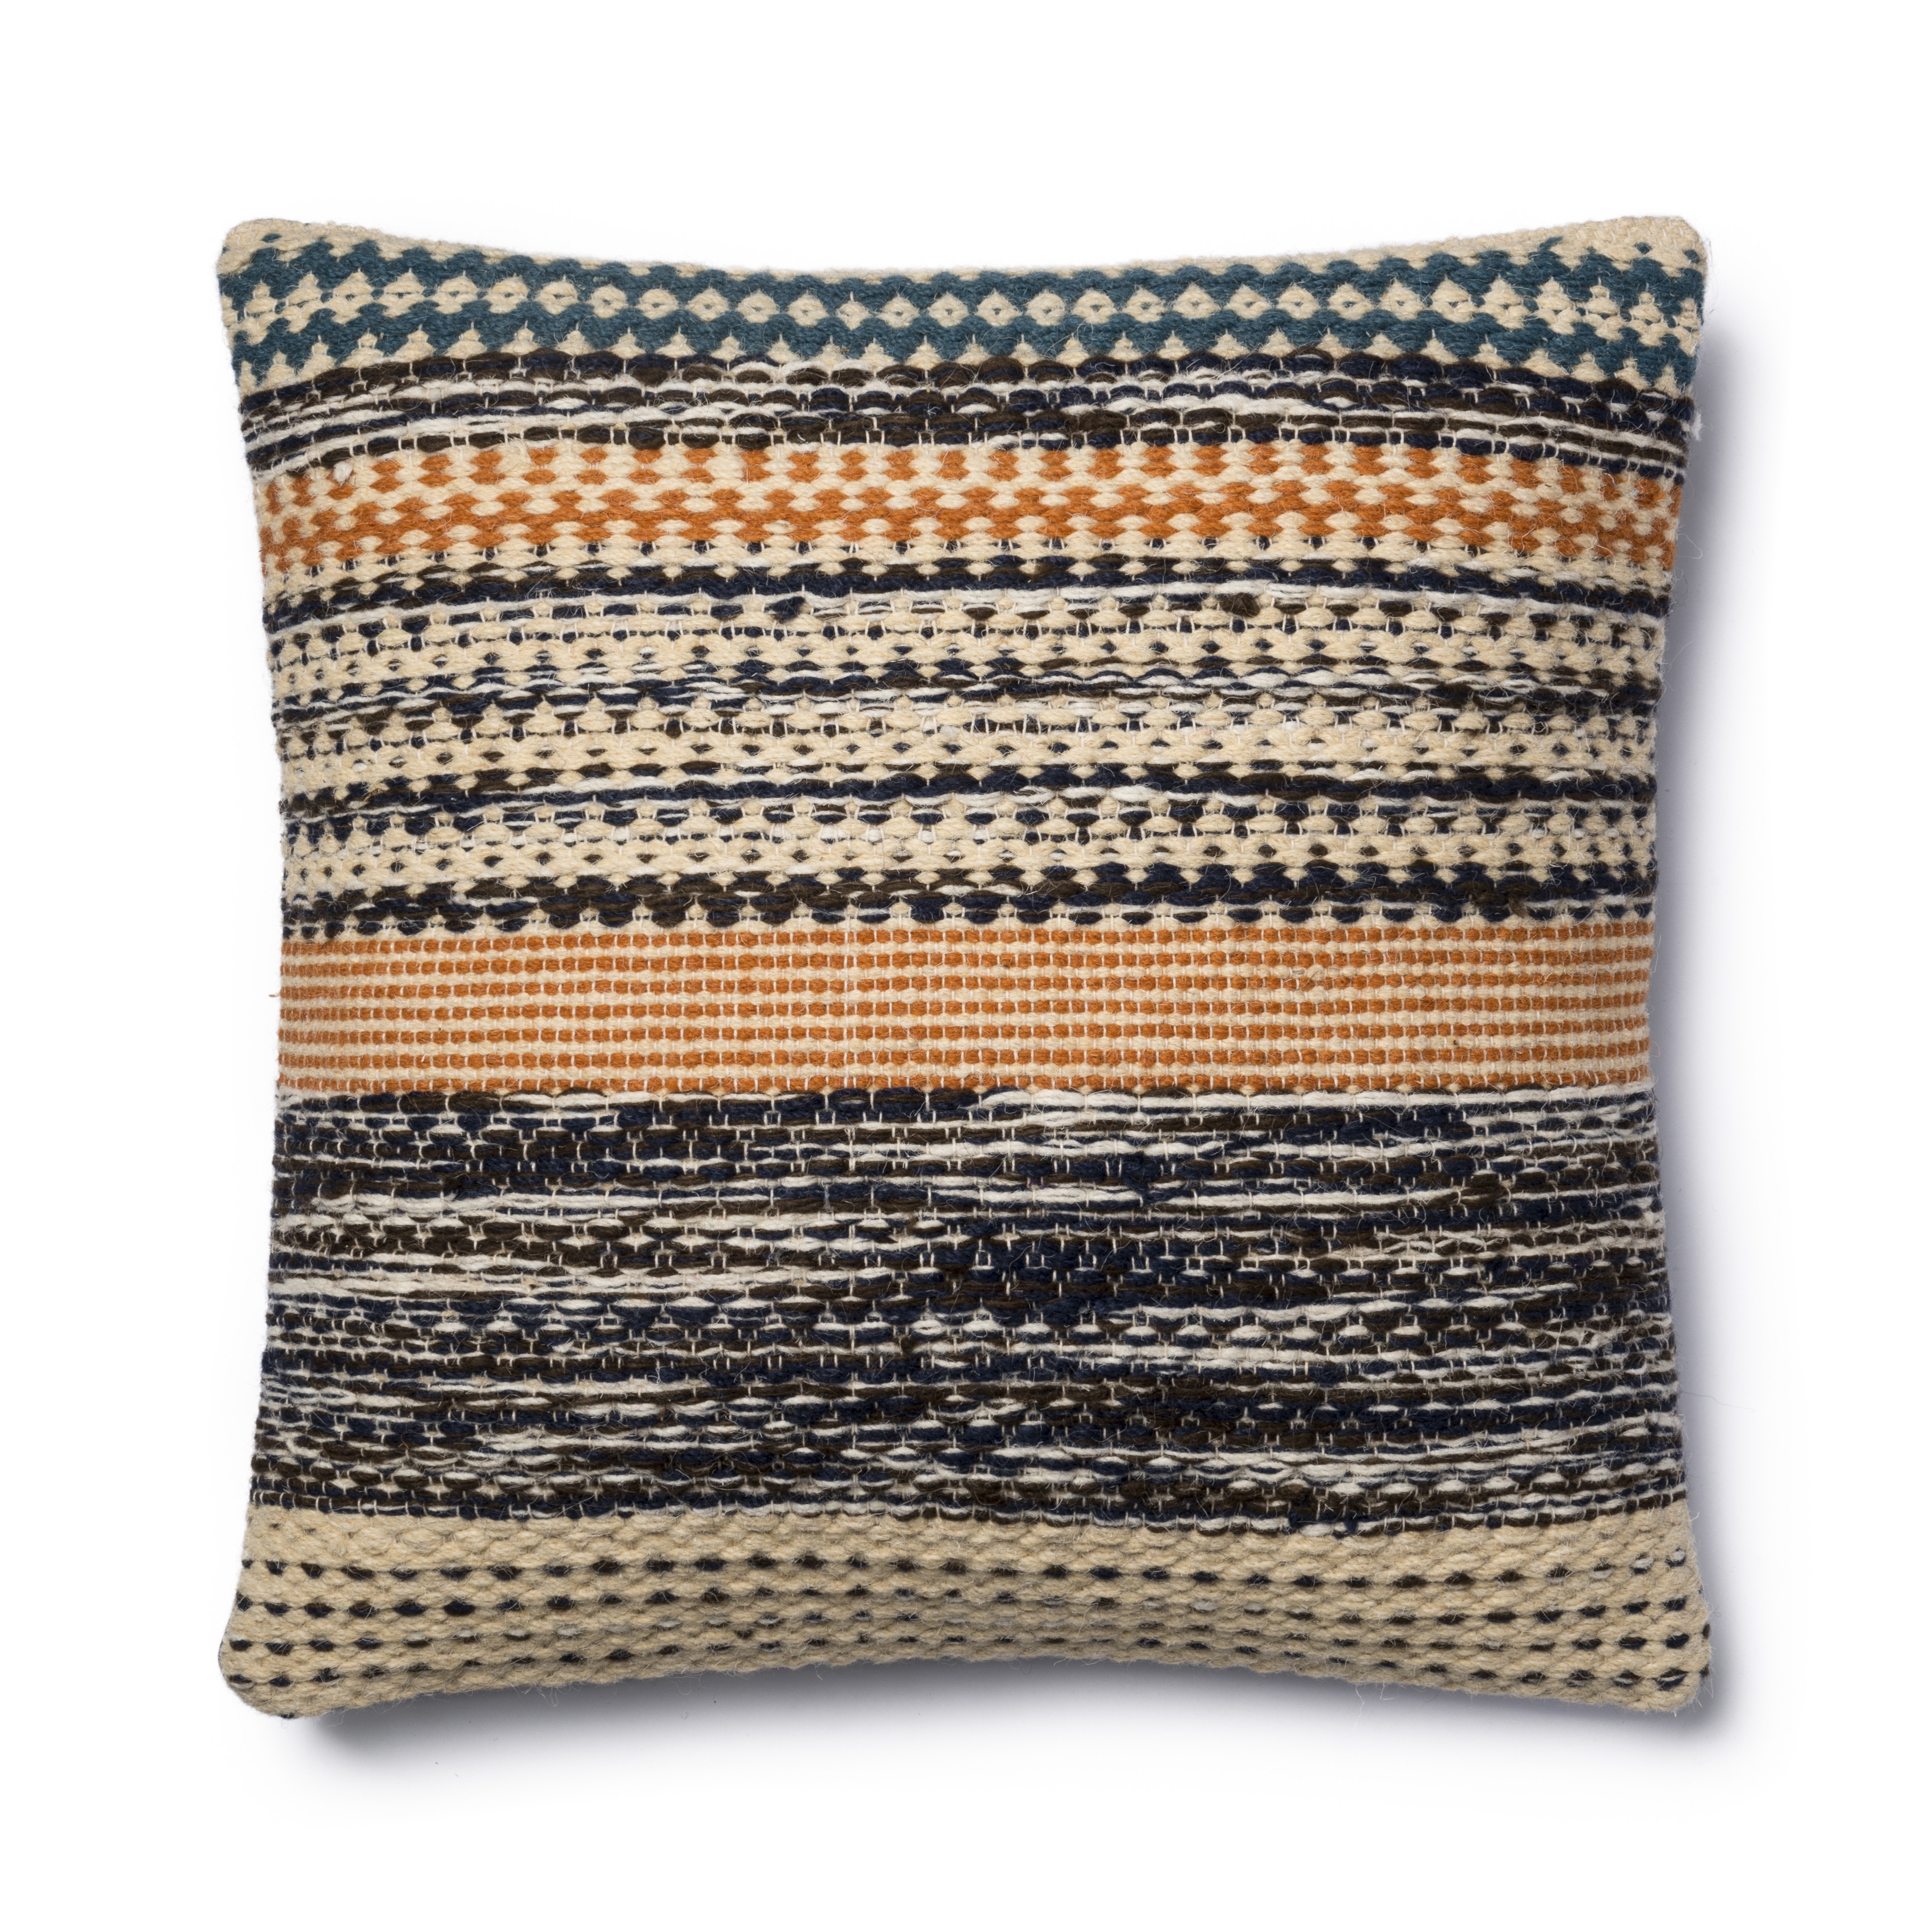 Magnolia Home by Joanna Gaines x Loloi Pillows P1009 Orange / Blue 13" x 21" Cover Only - Image 1